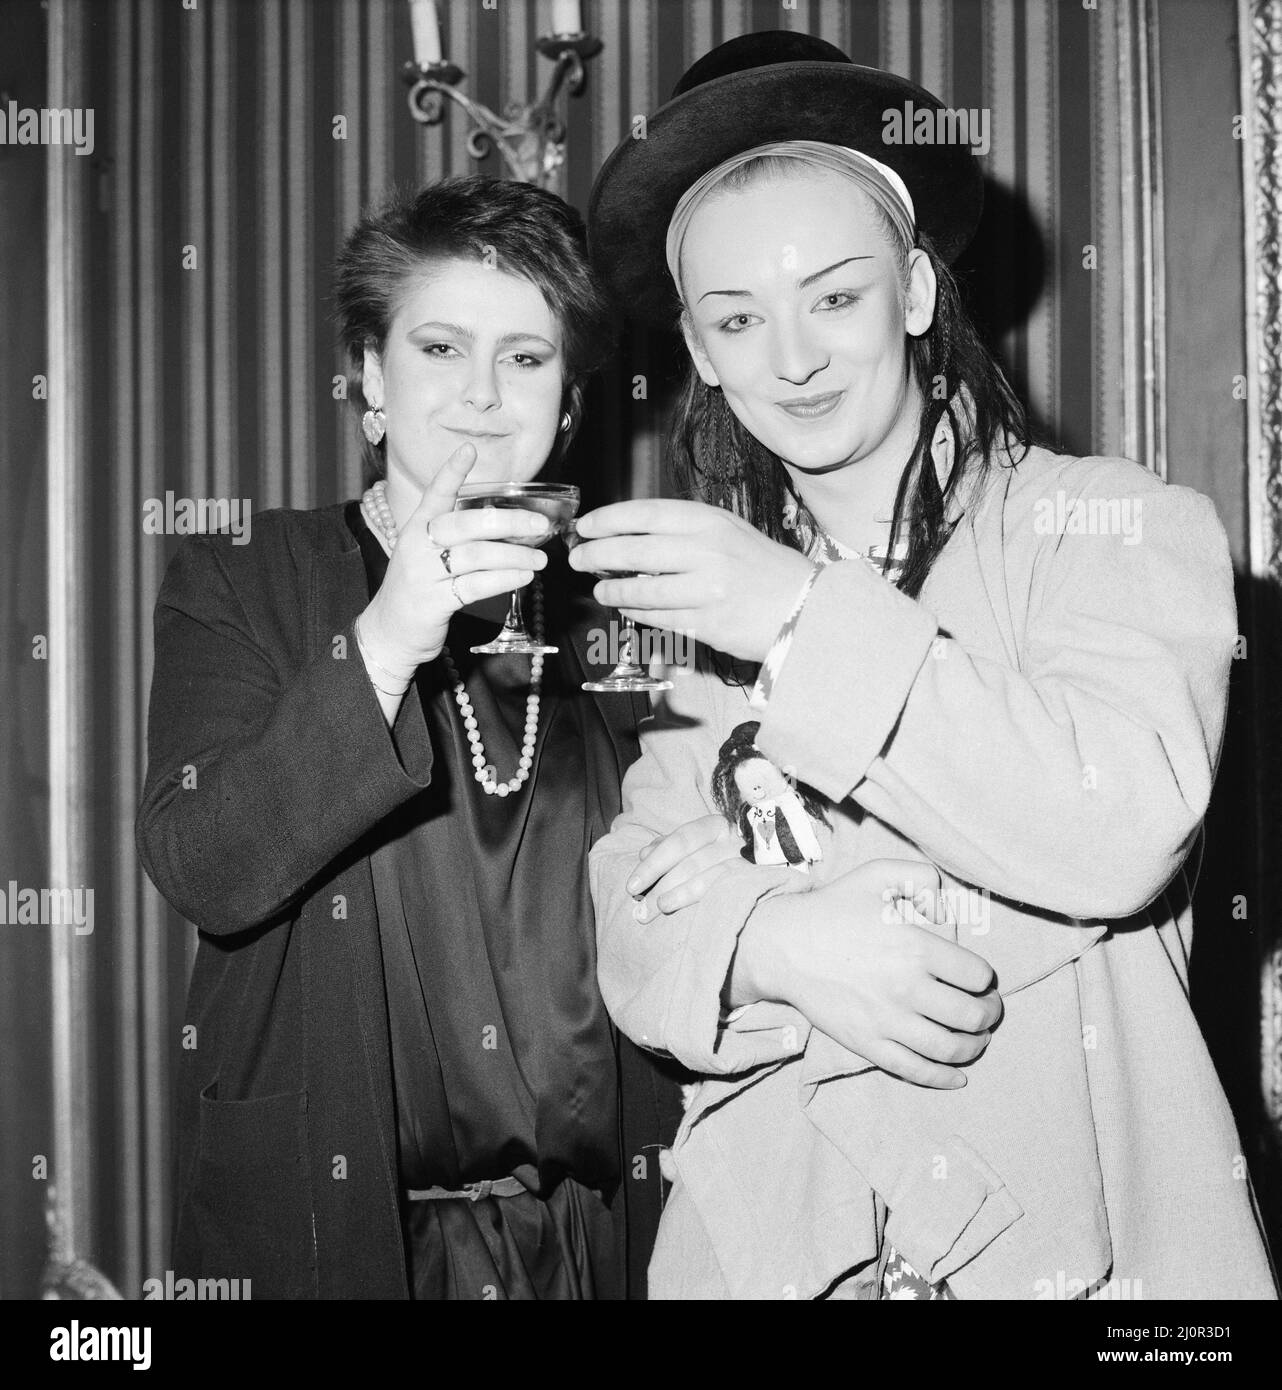 Alison Moyet, (also known as Alf from Yazoo. Pictured left) wins the Best Female Singer and Boy George, from the pop group Culture Club (pictured right), won The Daily Mirror Readers Award, at The British Rock and Pop Awards held at The Lyceum Ballroom in London. Both pictured enjoying the night.  Picture taken 8th February 1983 Stock Photo